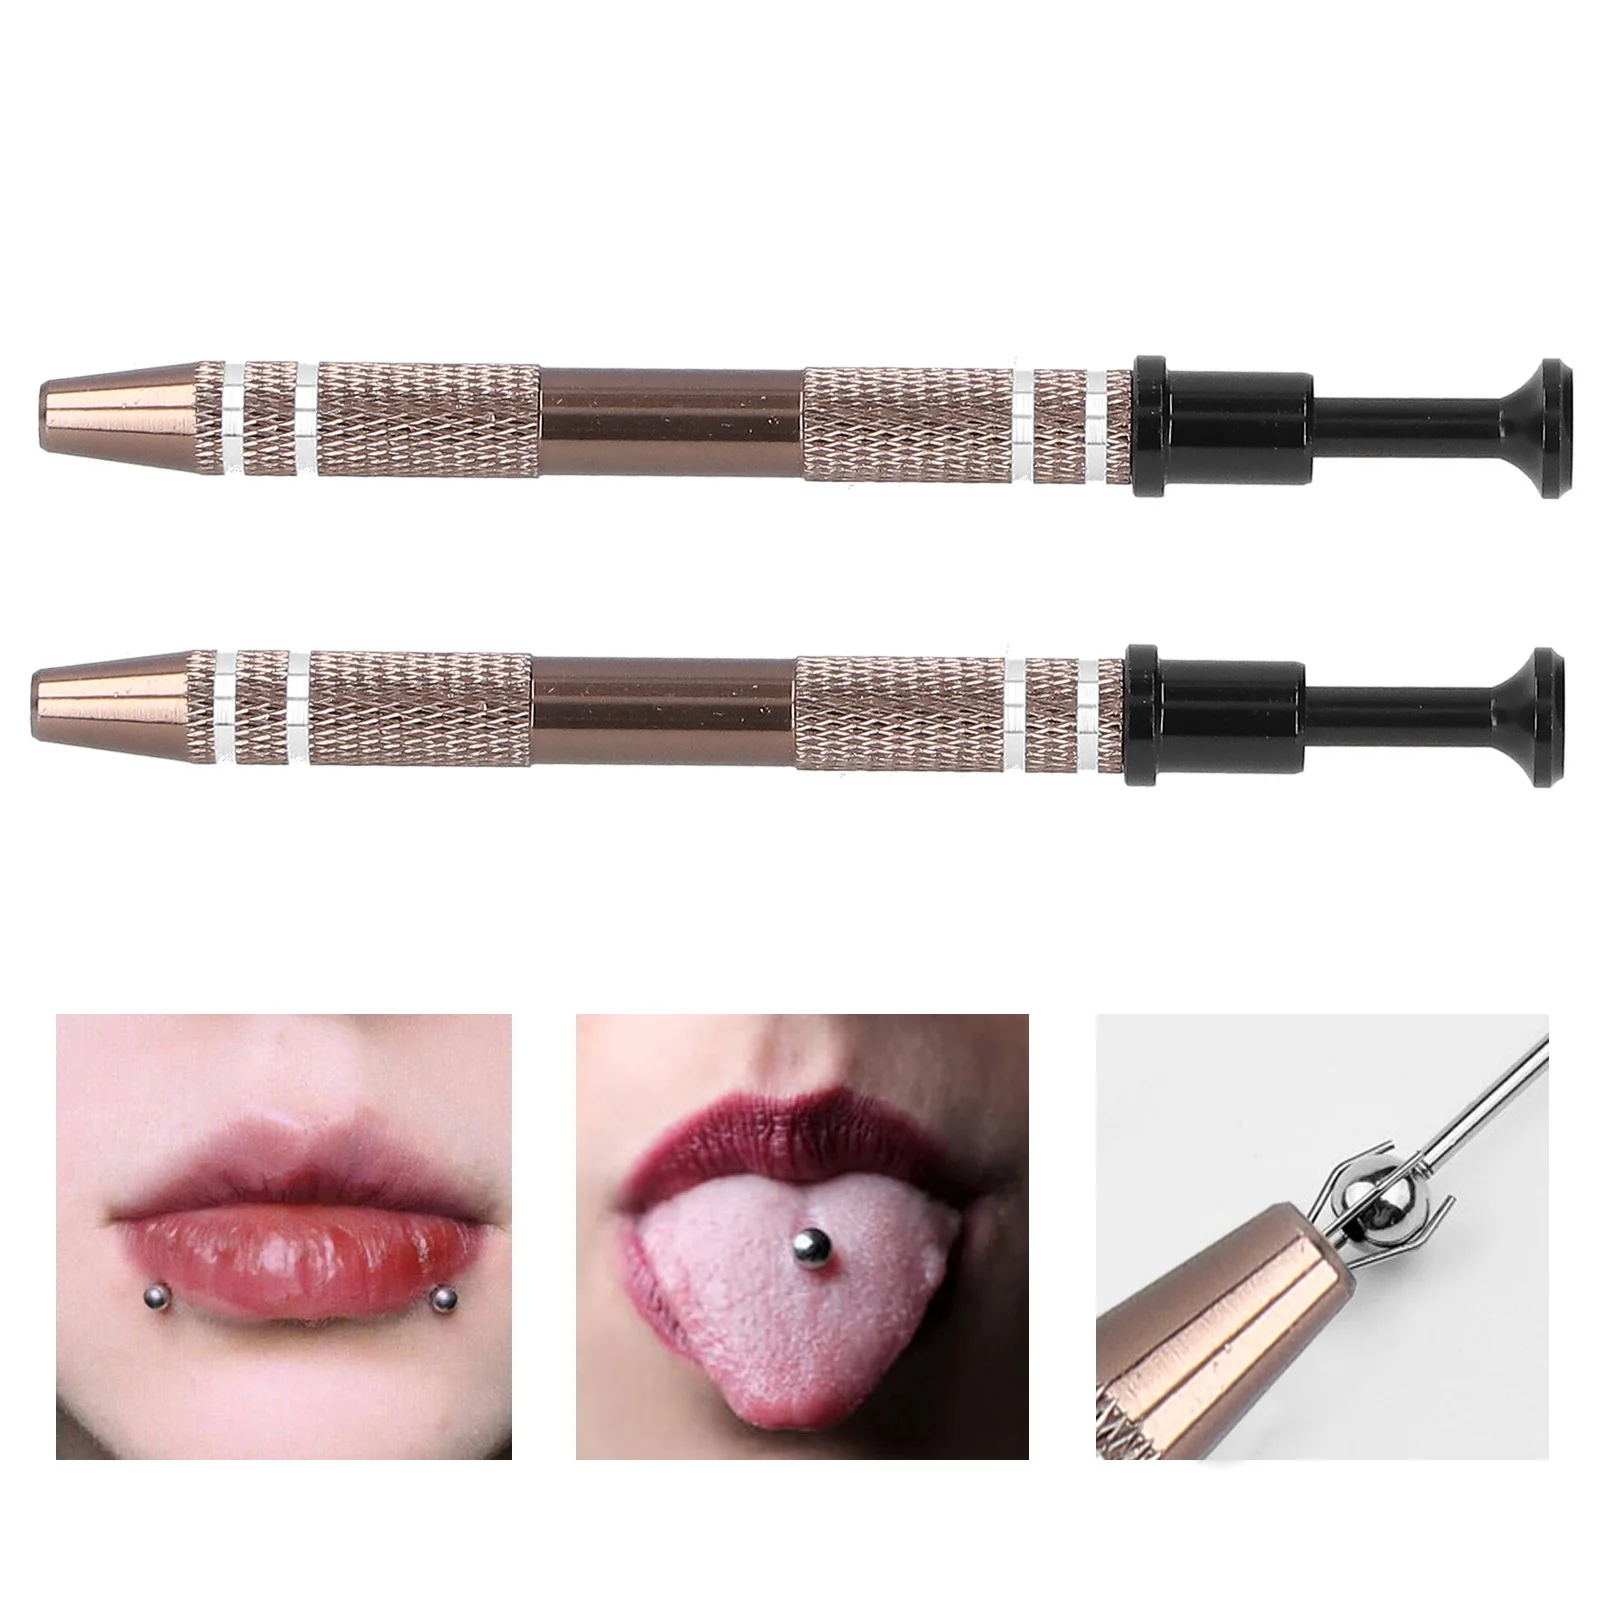 2Pcs Microblading Alloy High Precision 4 Prongs Bead Holder Jewelry Bead Grasping Pick Up Tool Body Tattoo Piercing Accessories 1 32 scale 15cm nodel diecast alloy high simulation classic car us 1923 pick up army truck vehicles toys collection display toy